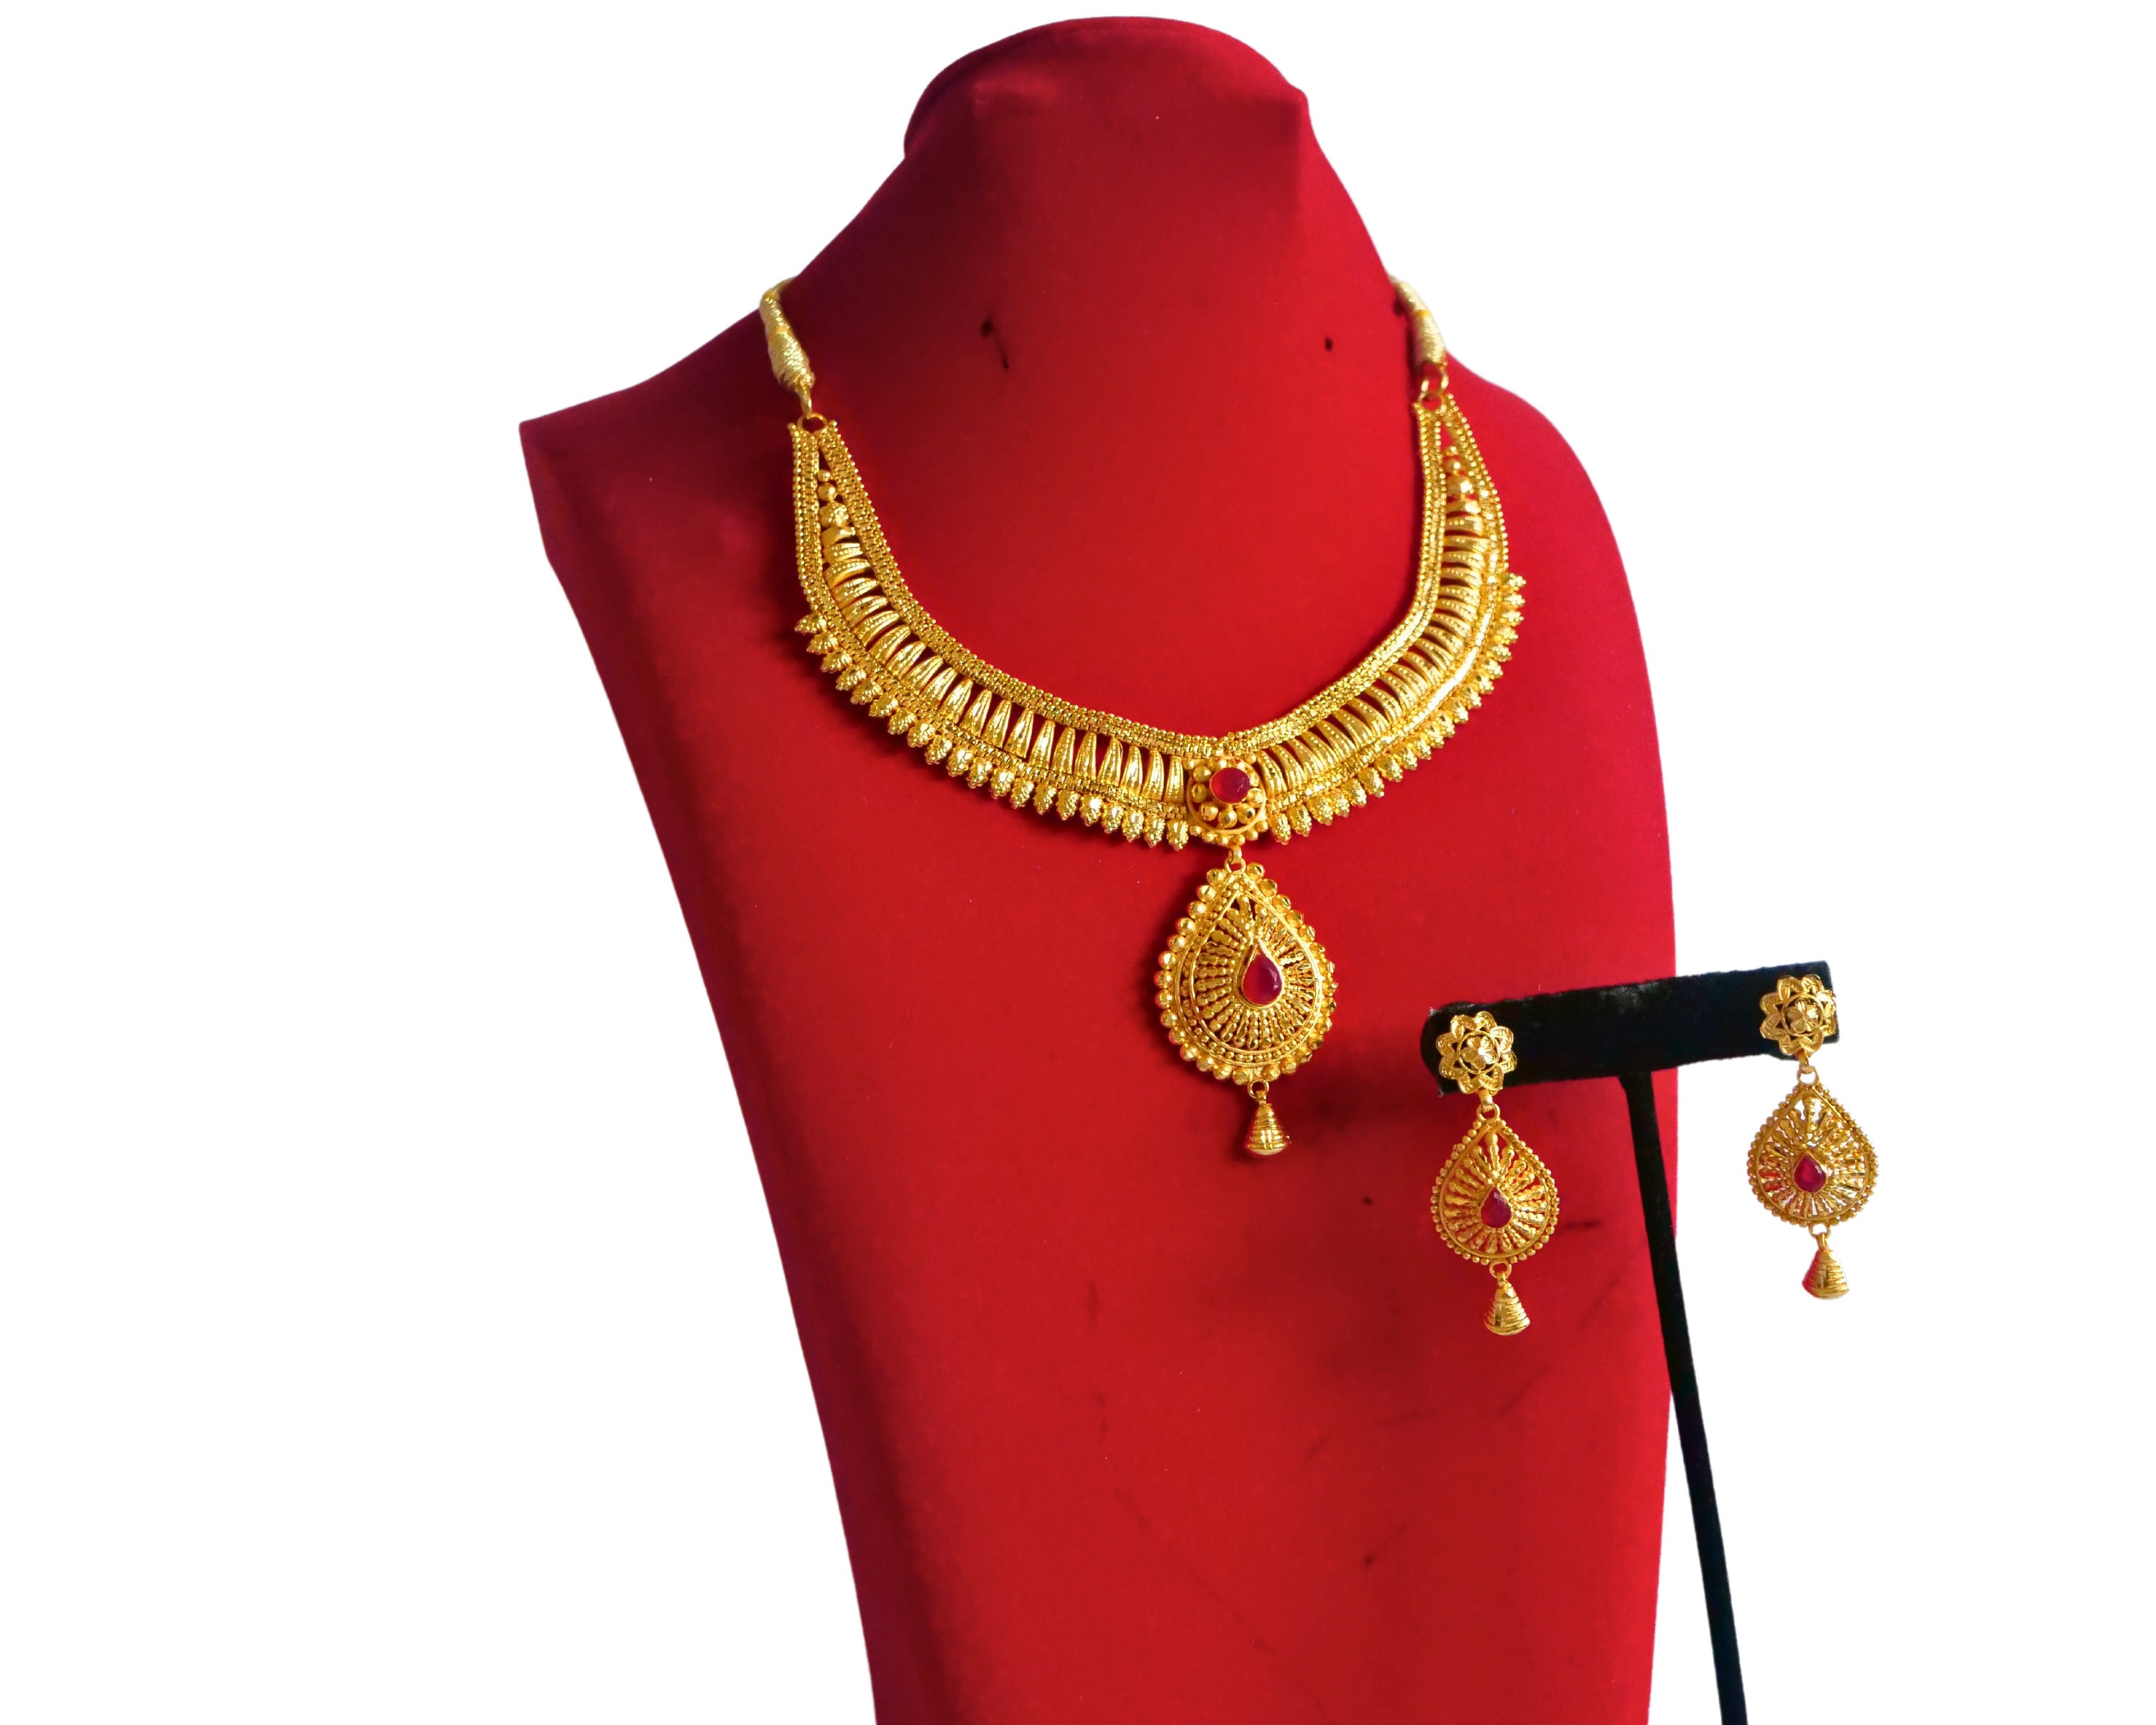 From Tradition to Trend: Allure of the Nepali Tilhari Necklace